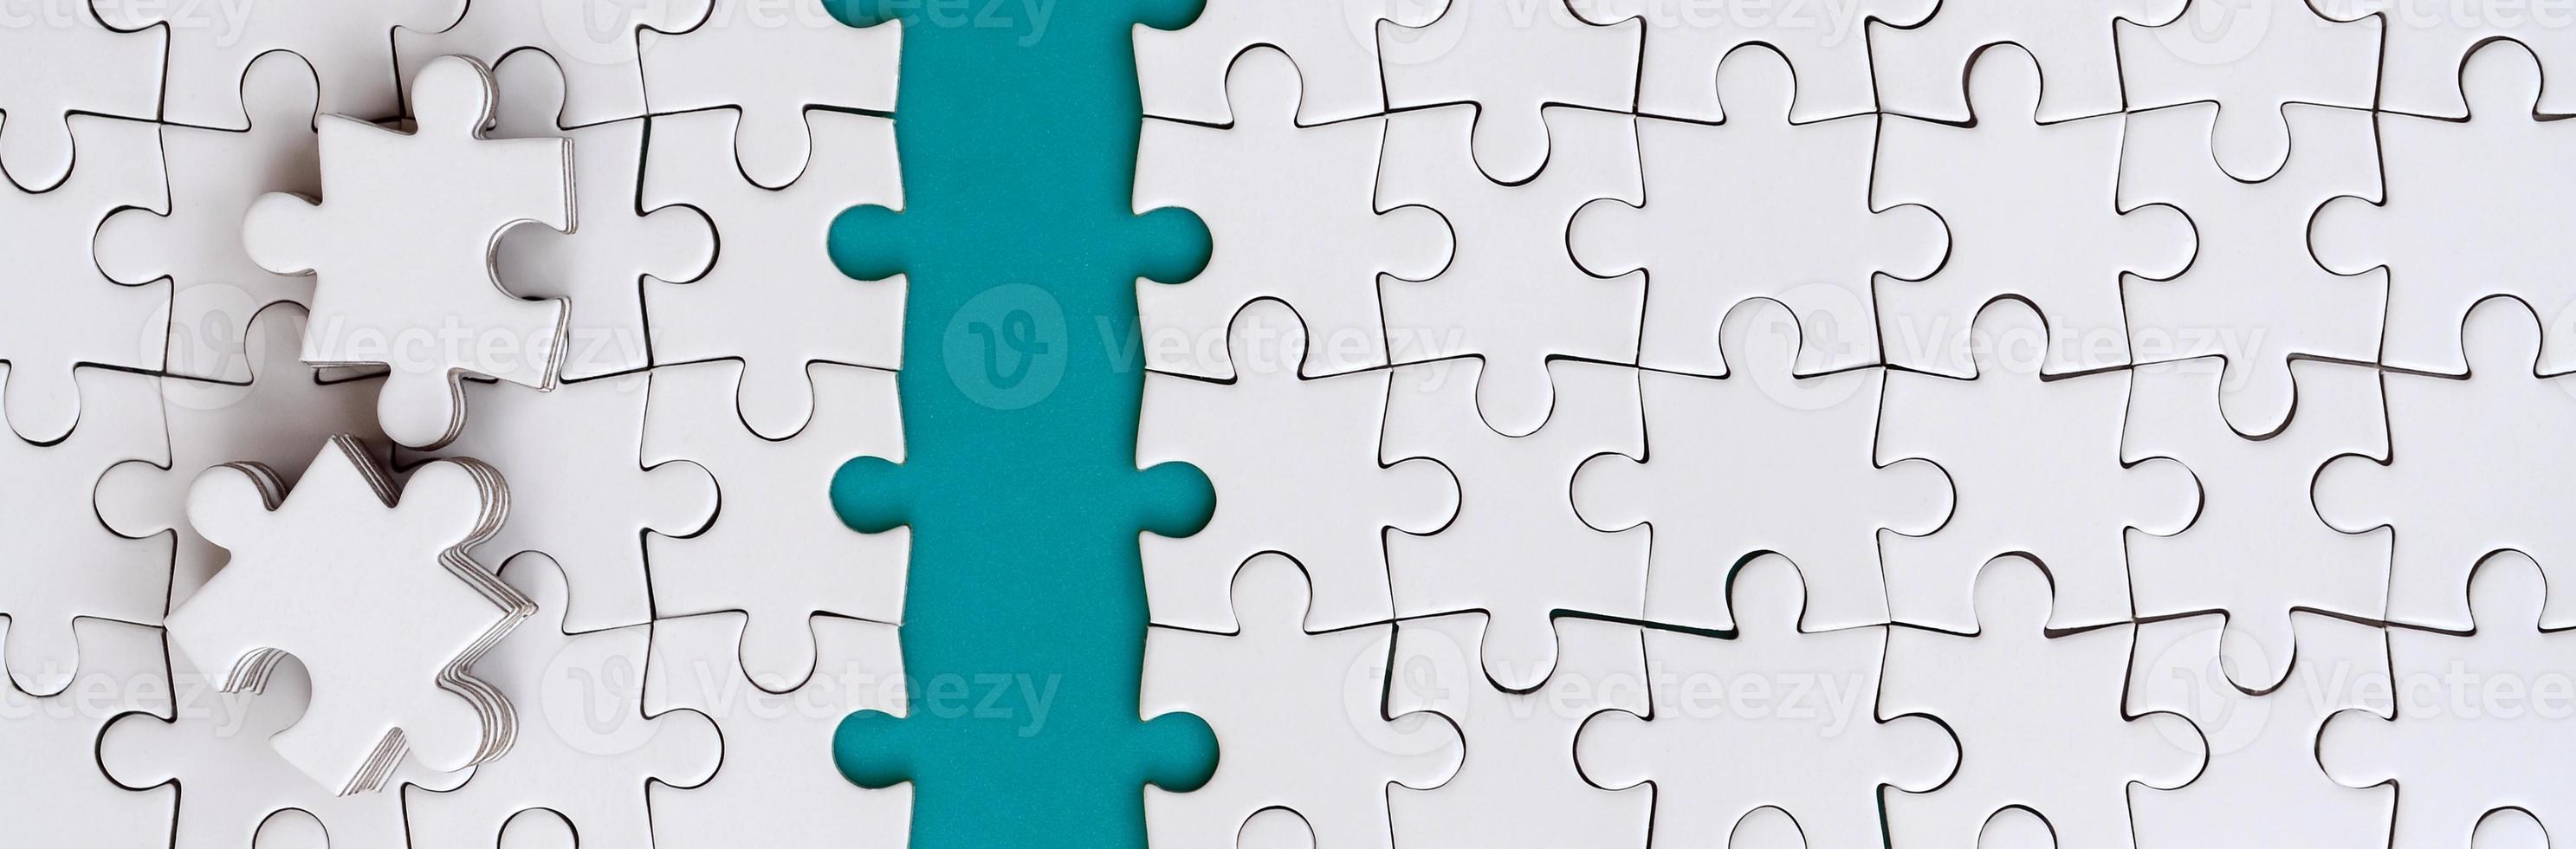 The blue path is laid on the platform of a white folded jigsaw puzzle. The missing elements of the puzzle are stacked nearby. Texture image with space for text photo